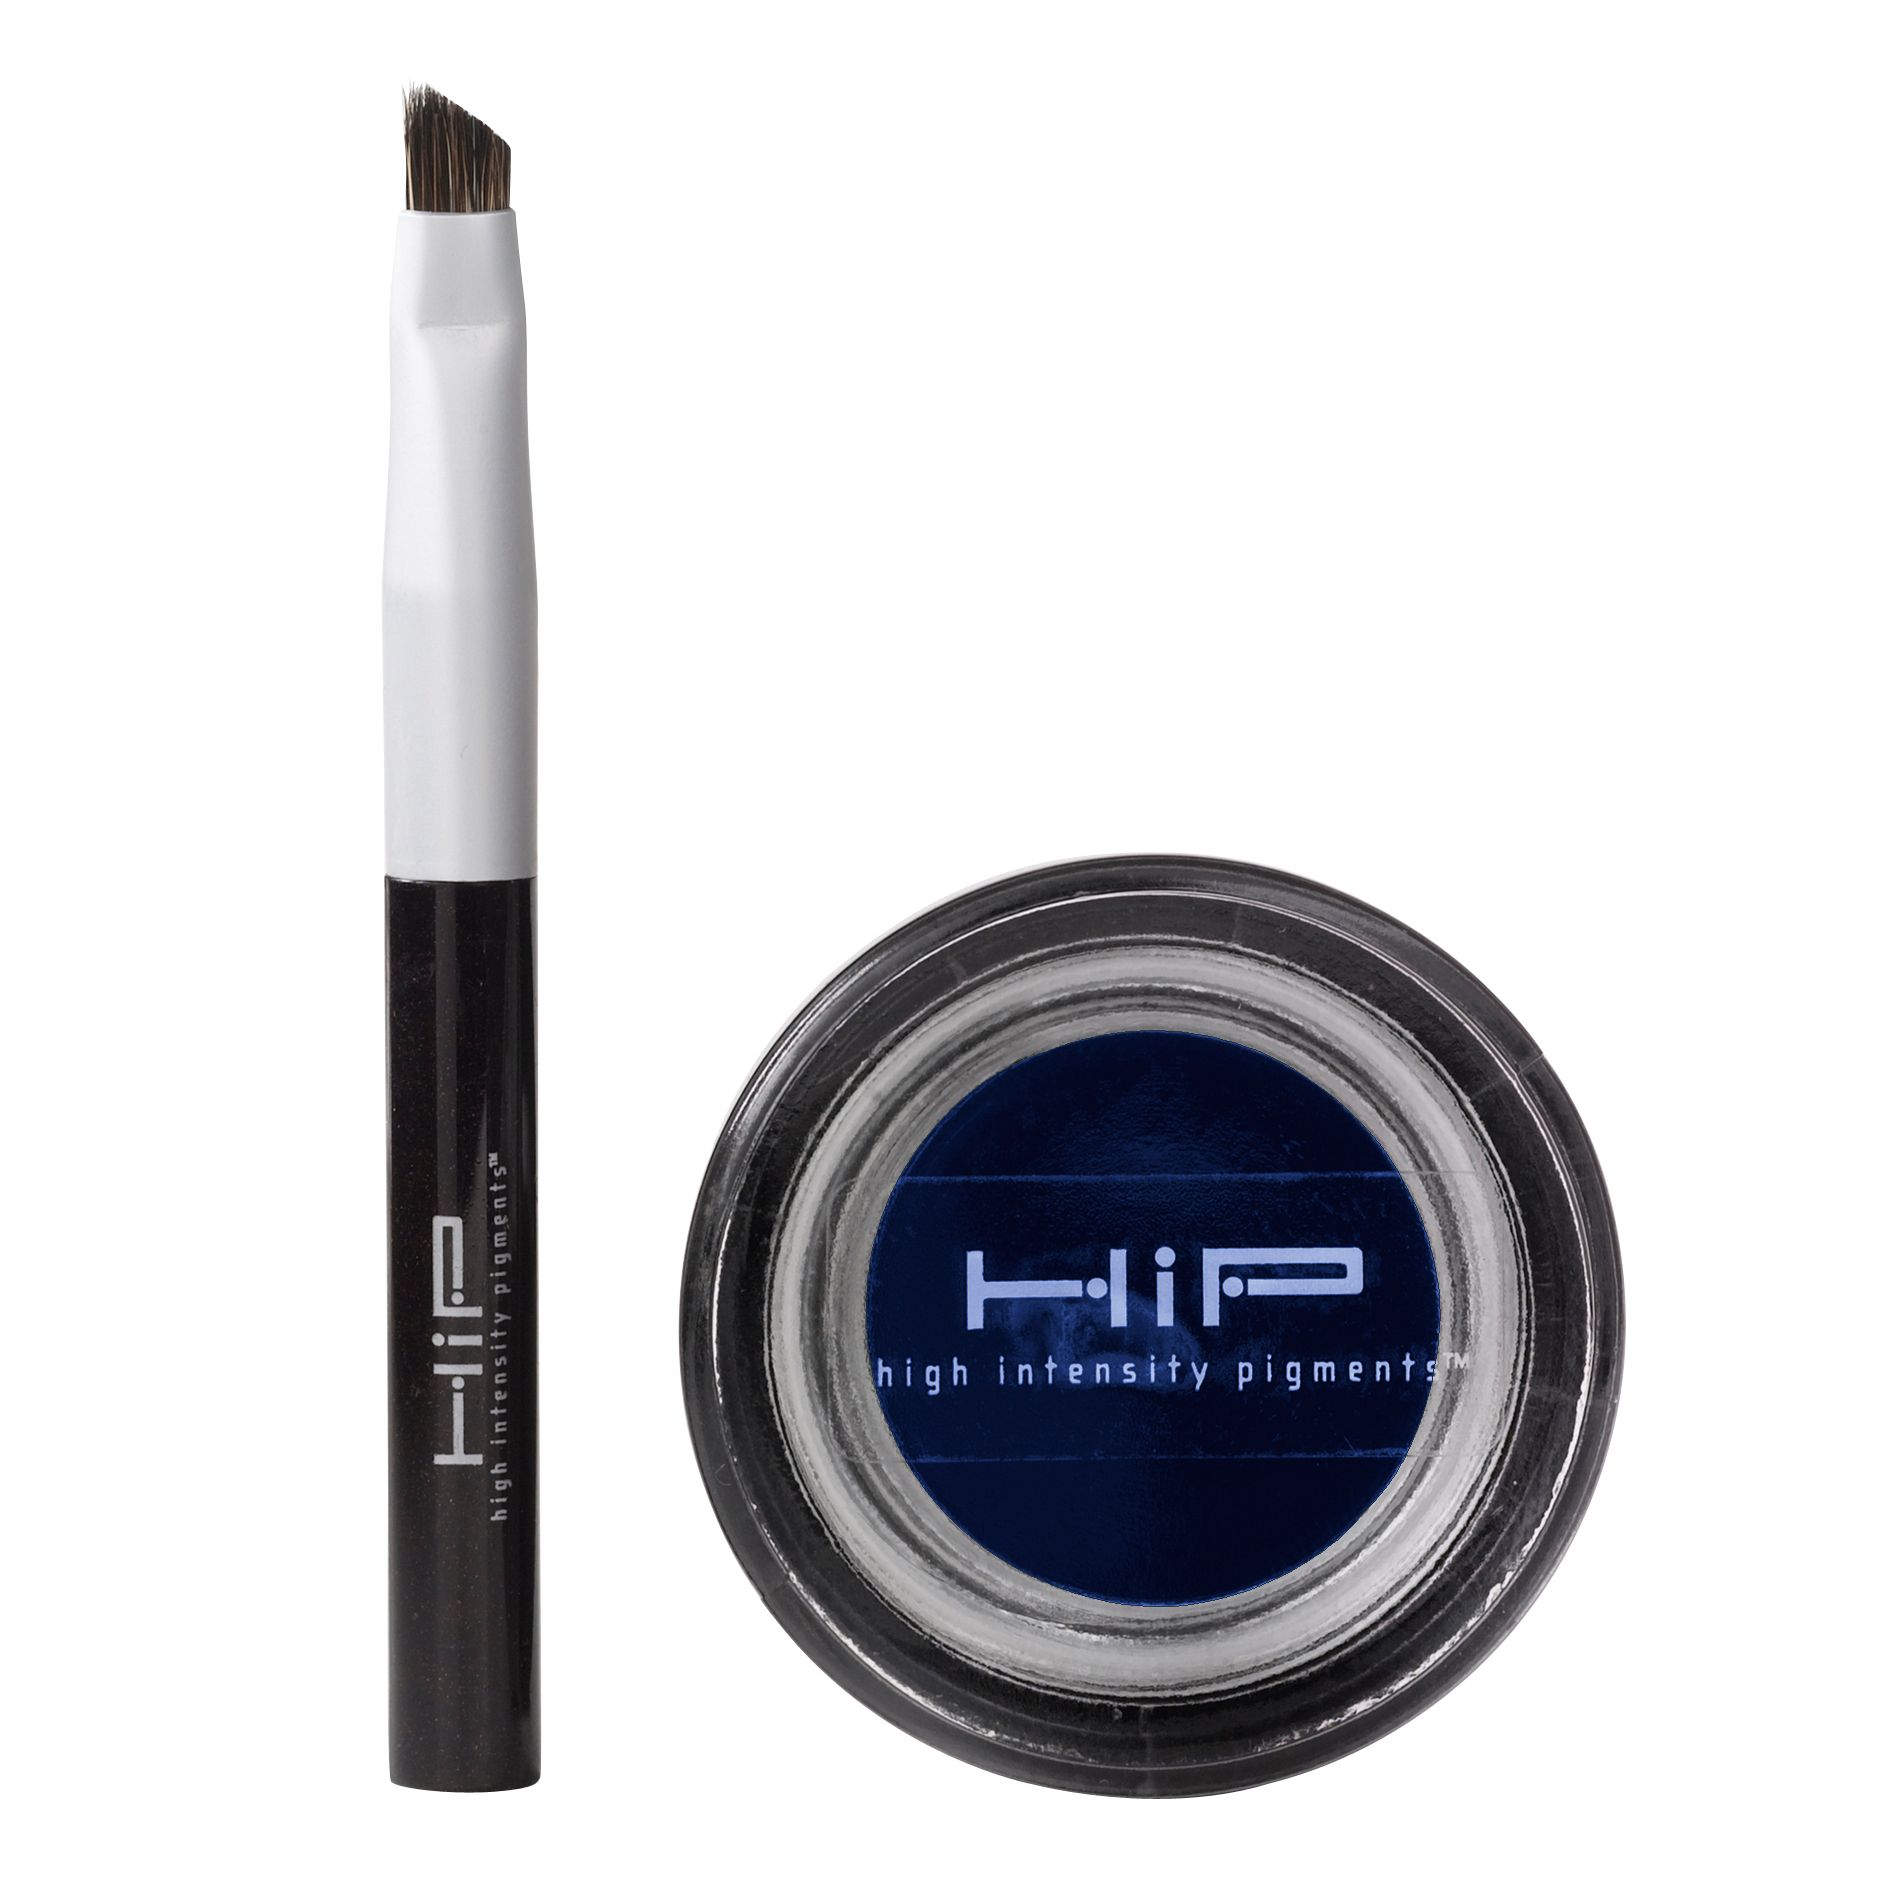 L'Oreal Hip Color Truth Cream Eyeliner